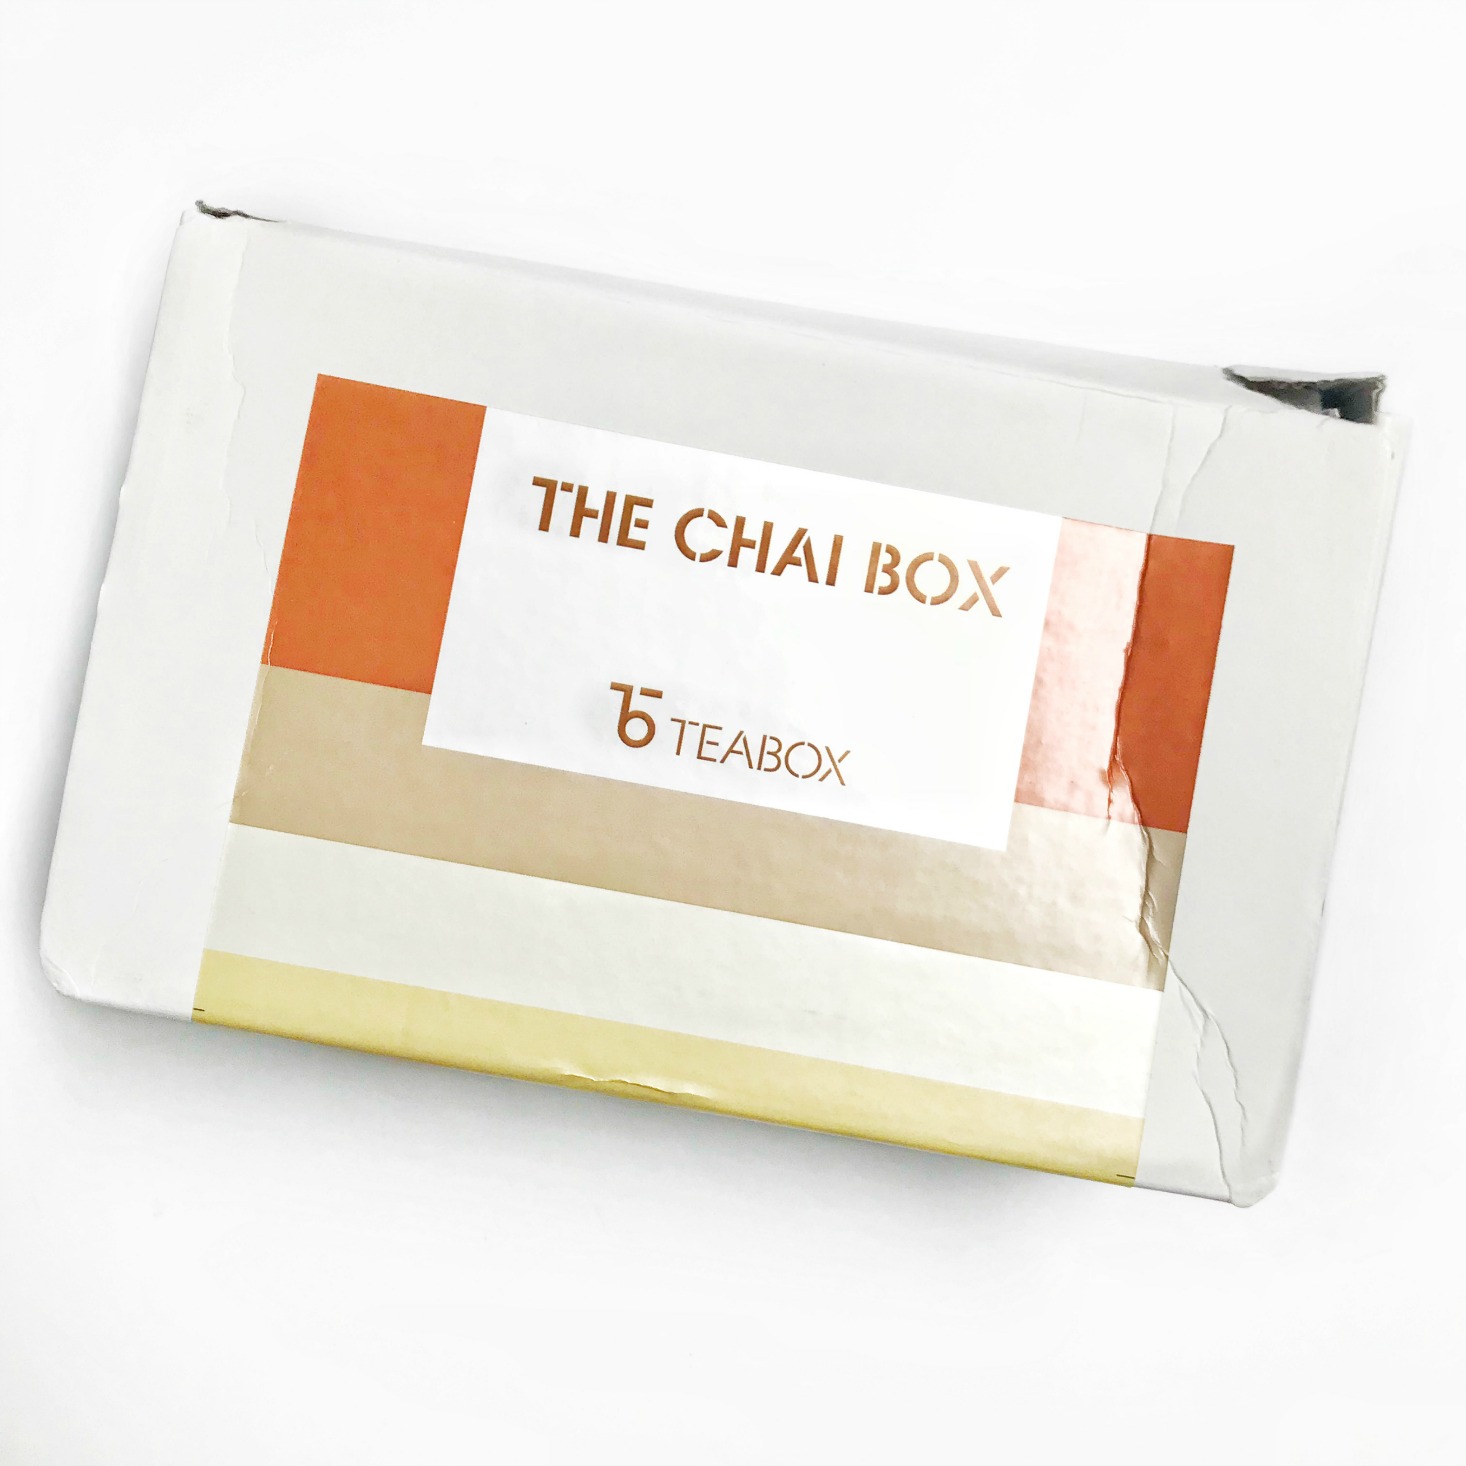 Teabox “The Chai Box” Review + 50% Off Coupon – March 2018